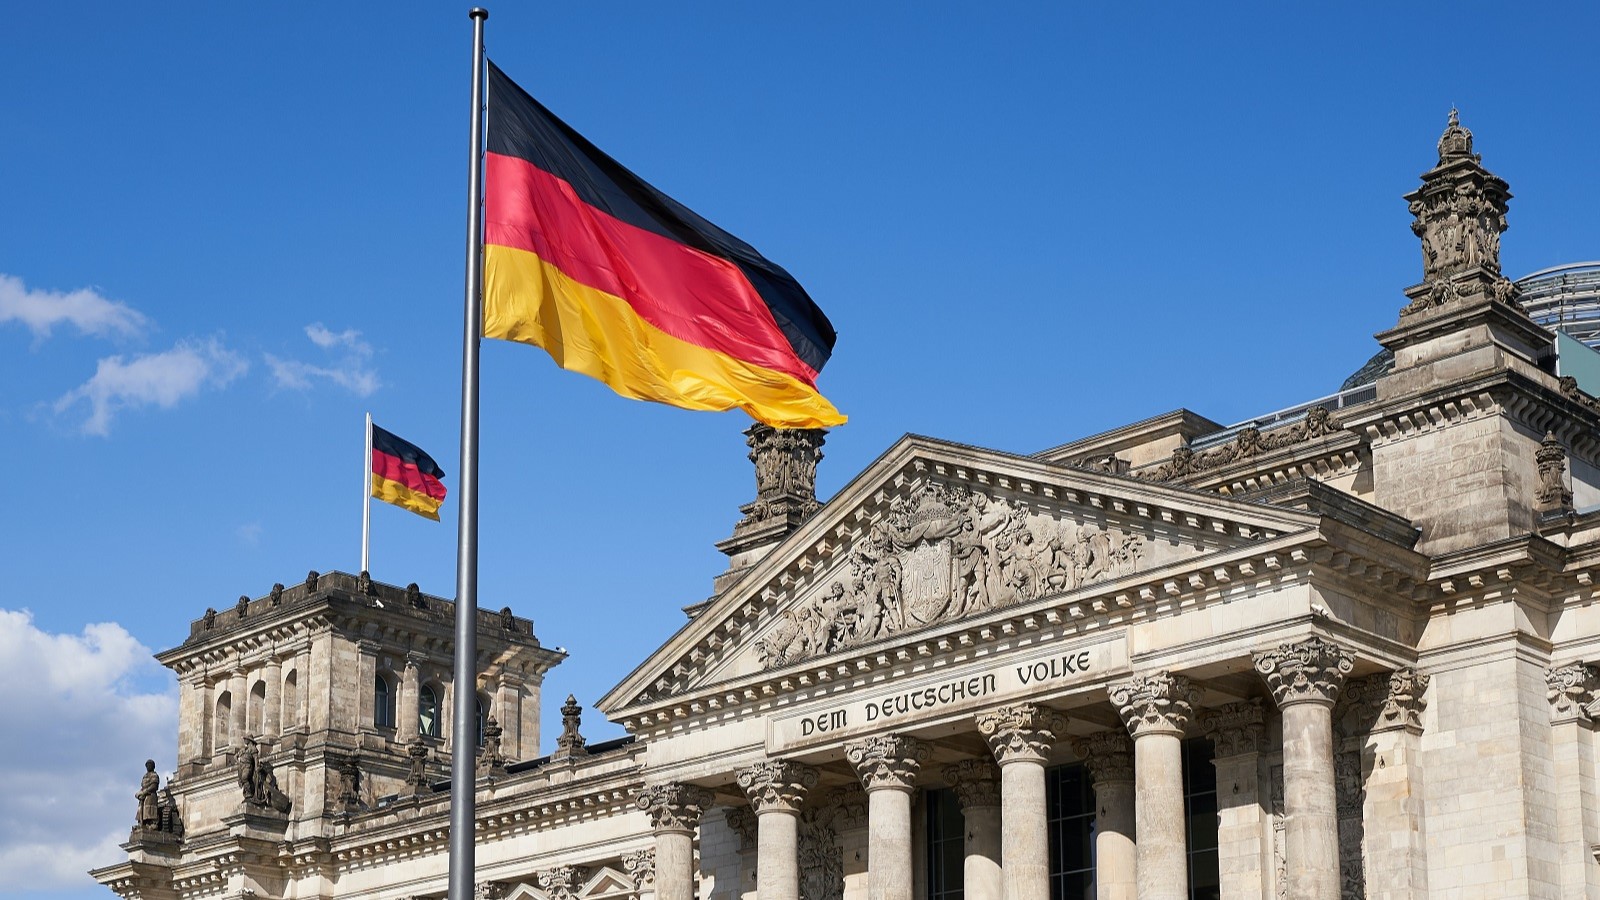 Black,red, and yellow German flag on a pole outside of large stone building with columns